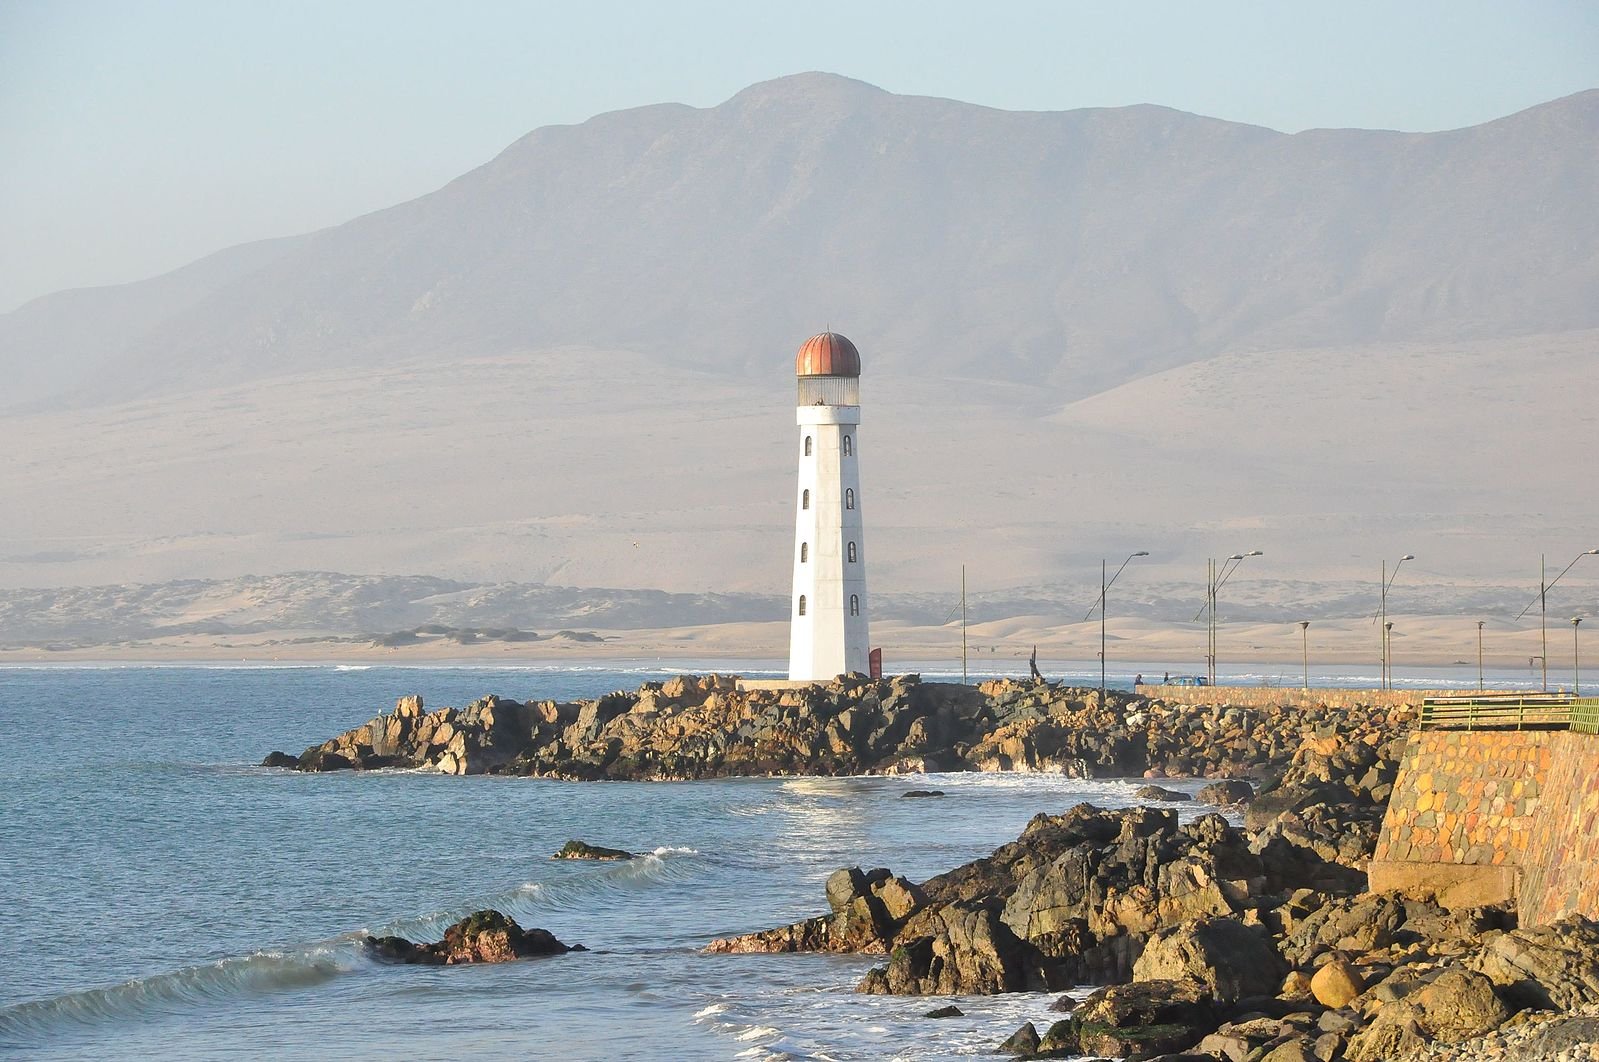 Huasco's Faro Monumental lighthouse on a rocky outcrop surrounded by calm sea with high desert mountains hazy in the distance.